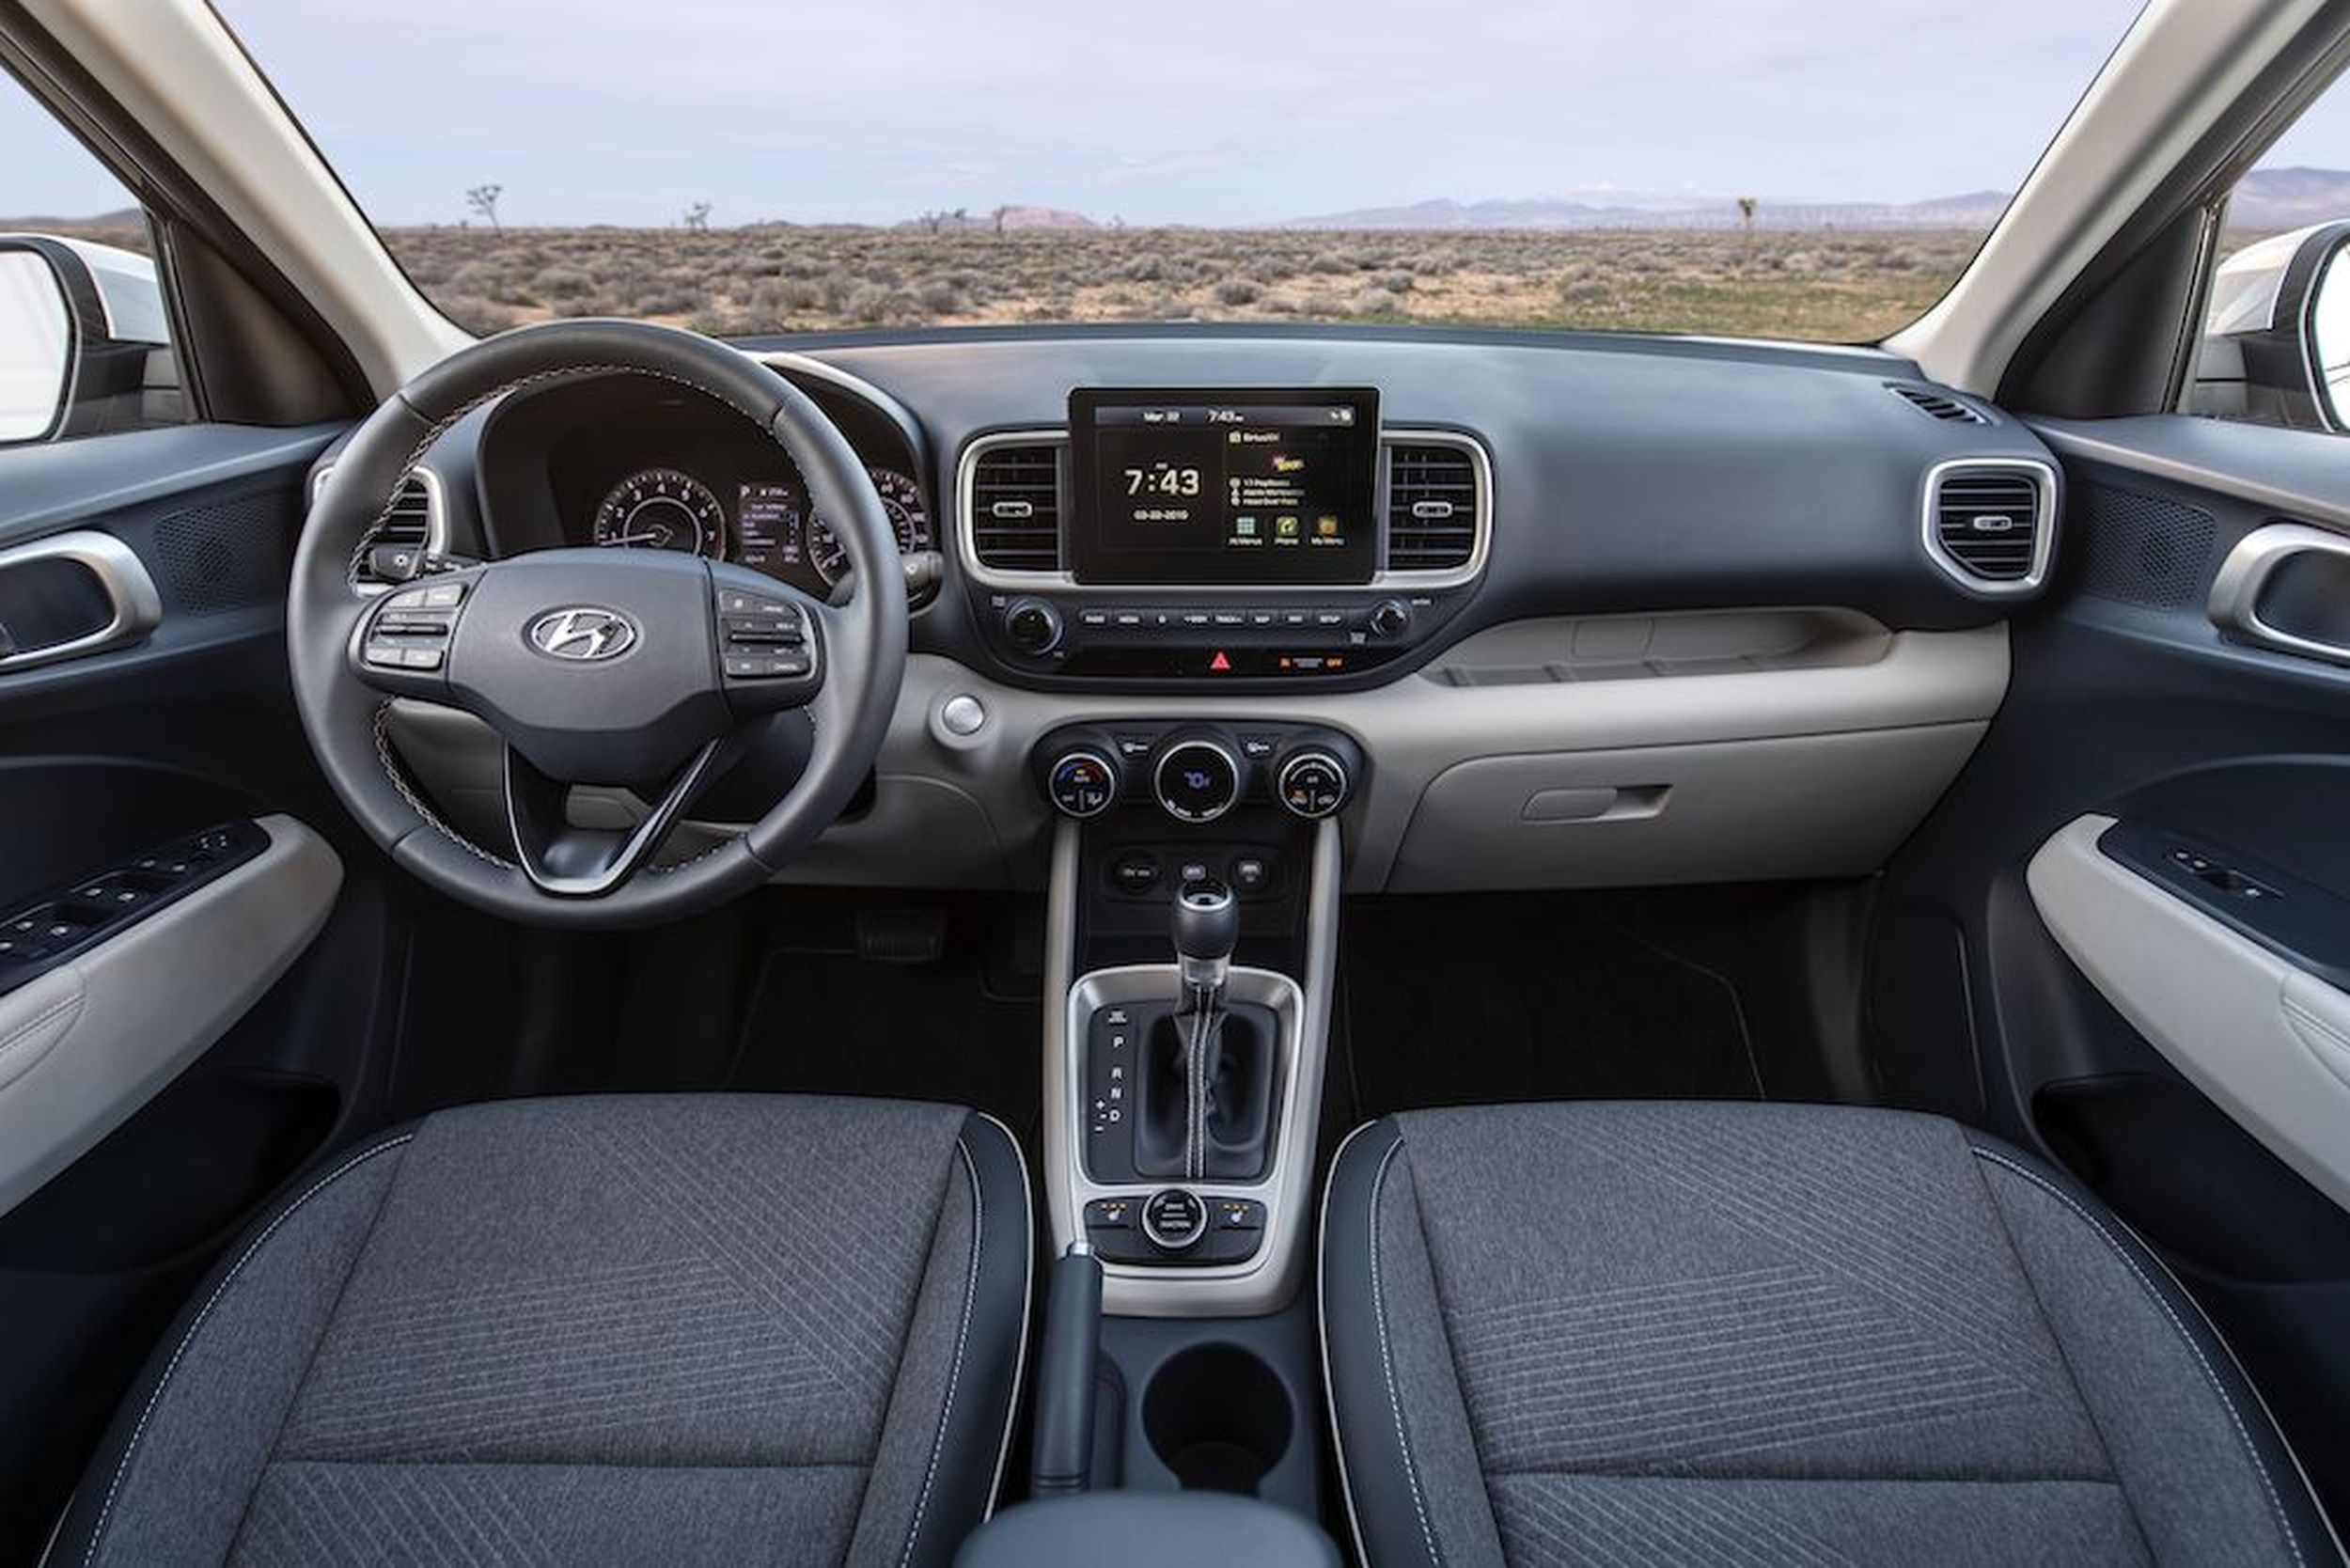 2020 Hyundai Venue: All-new subcompact crossover targets young